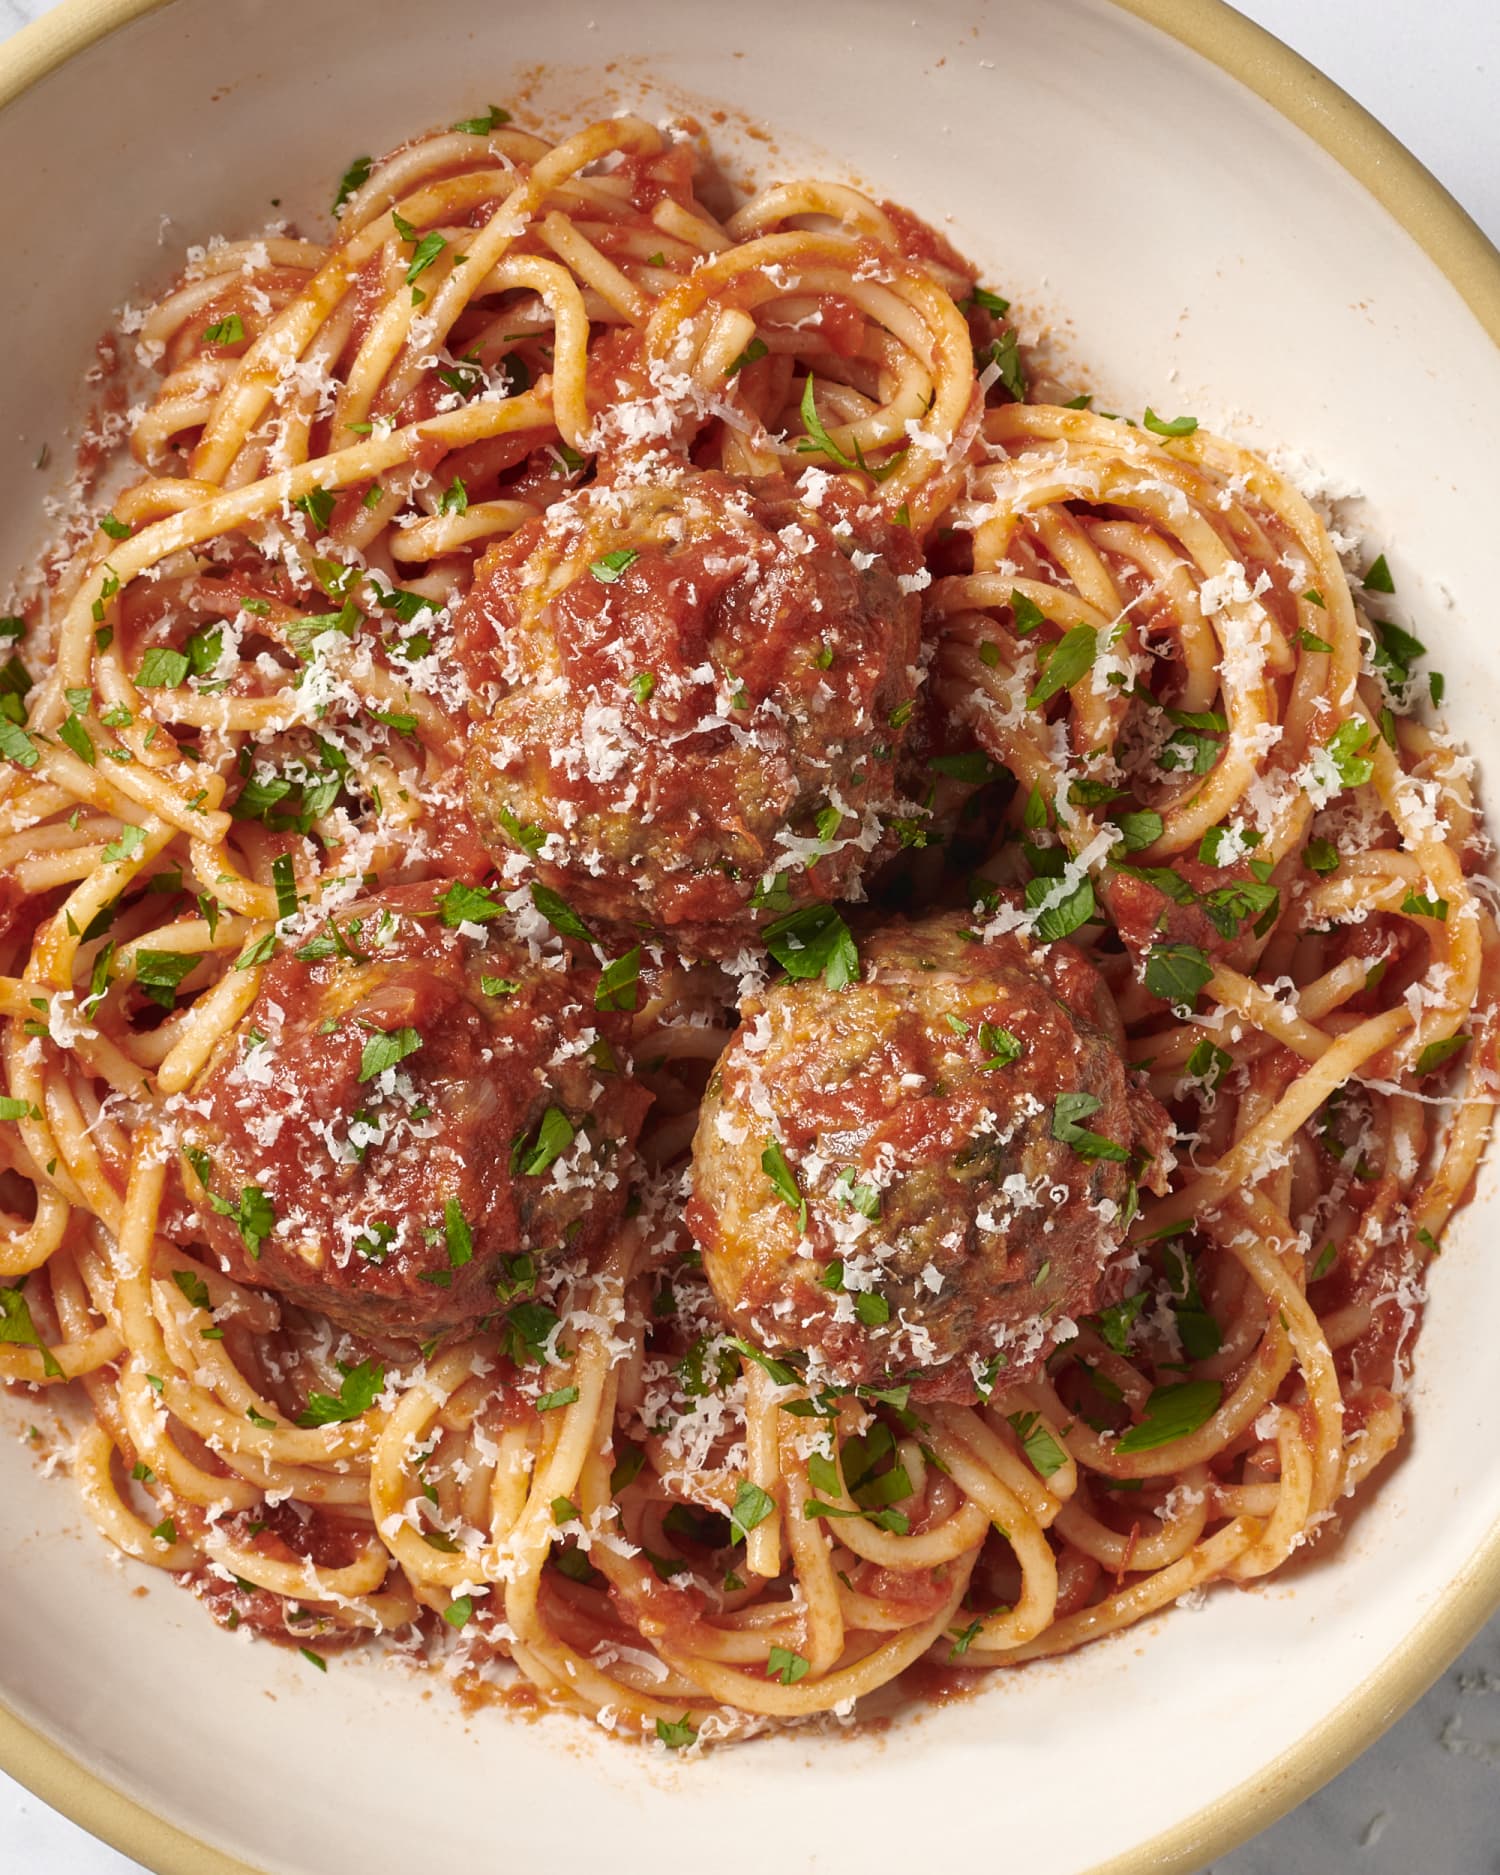 The Spaghetti and Meatballs Recipe That Never Lets Me Down